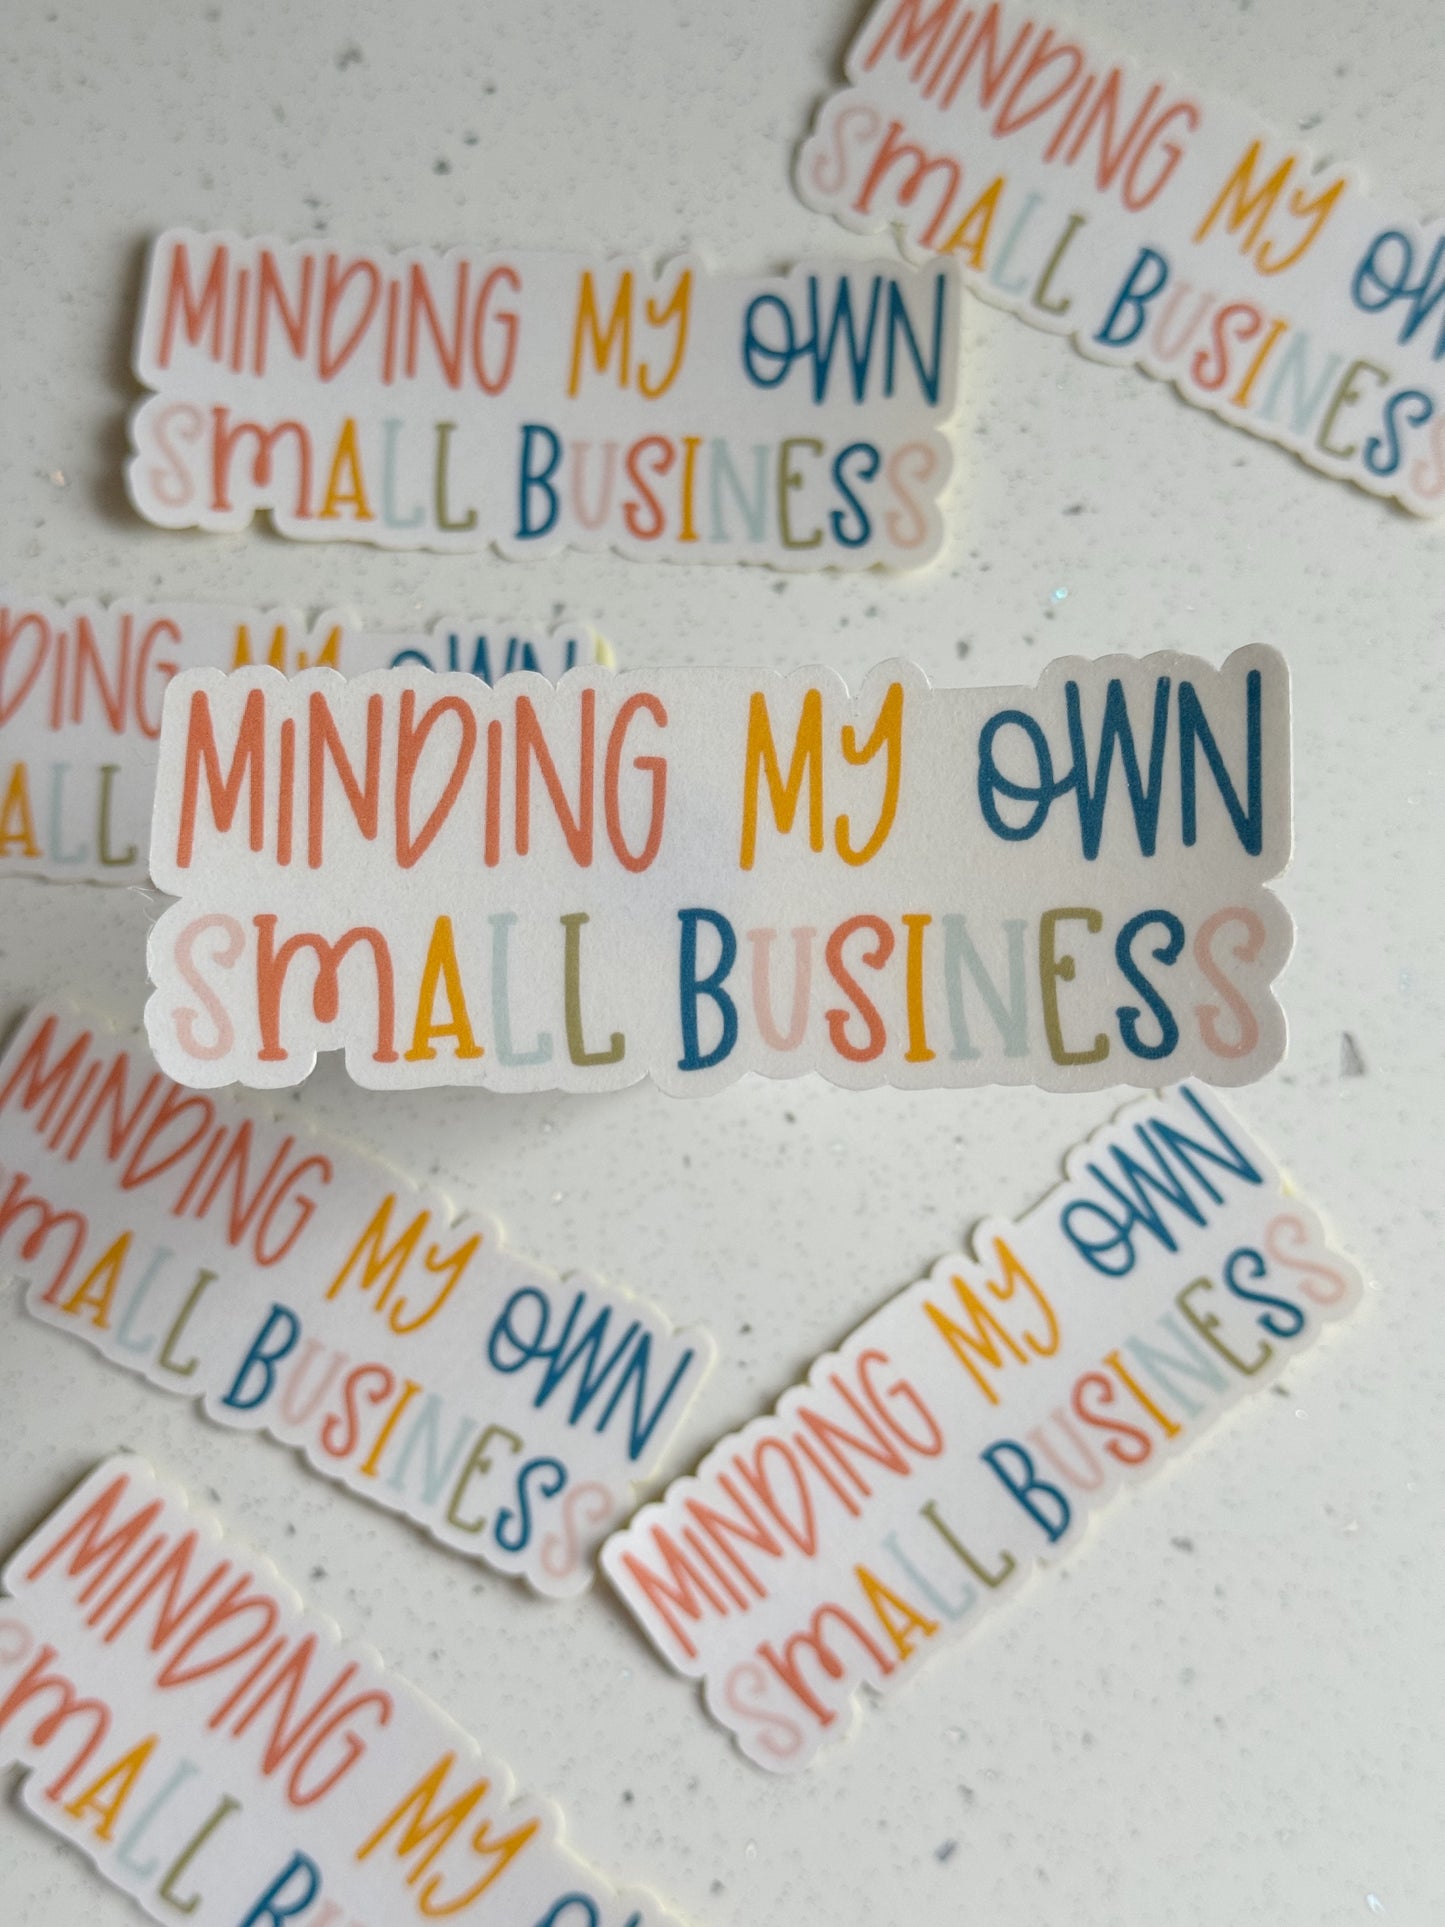 "Minding My Own Small Business" Sticker